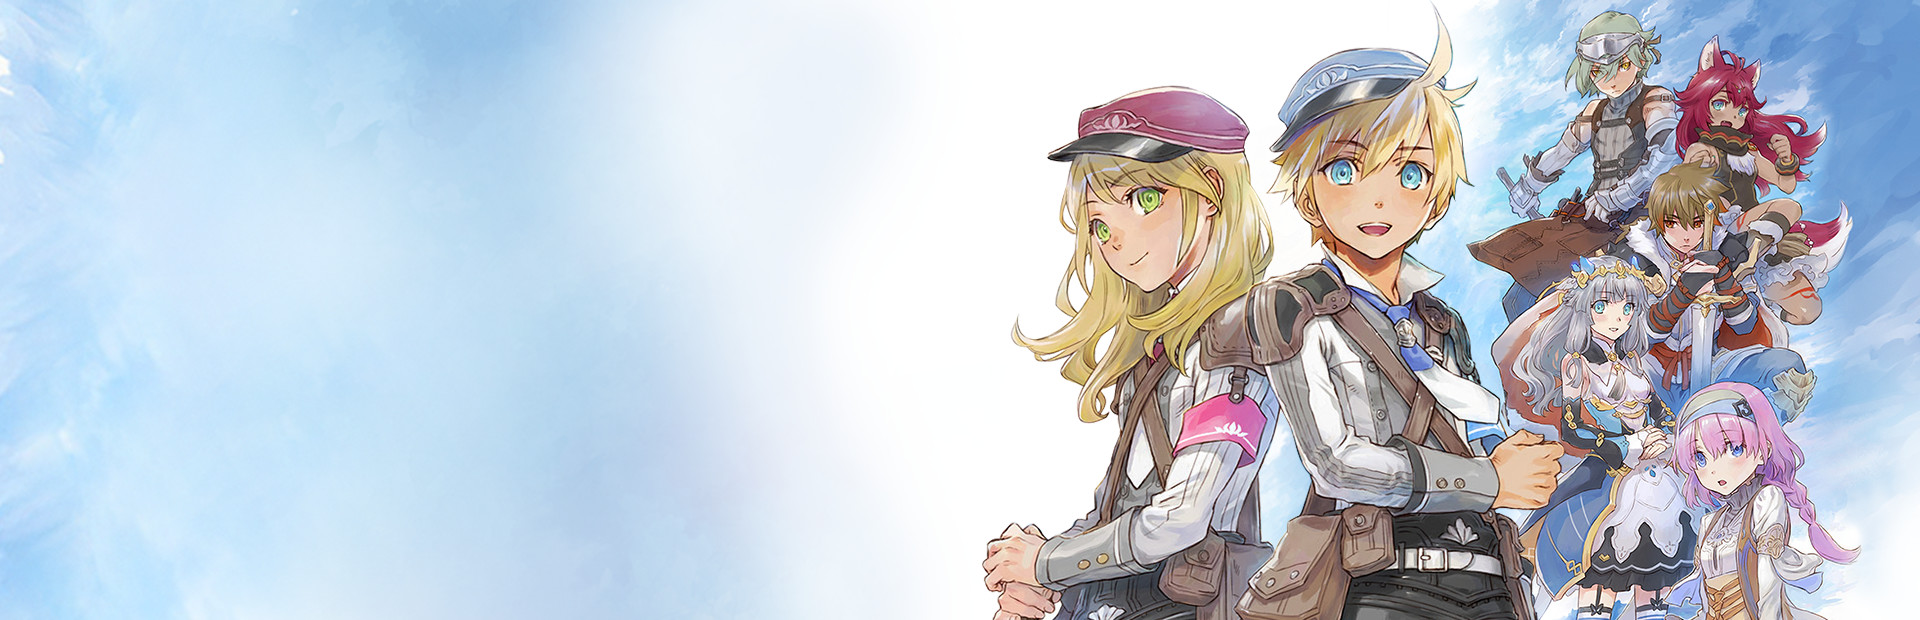 Rune Factory 5 cover image